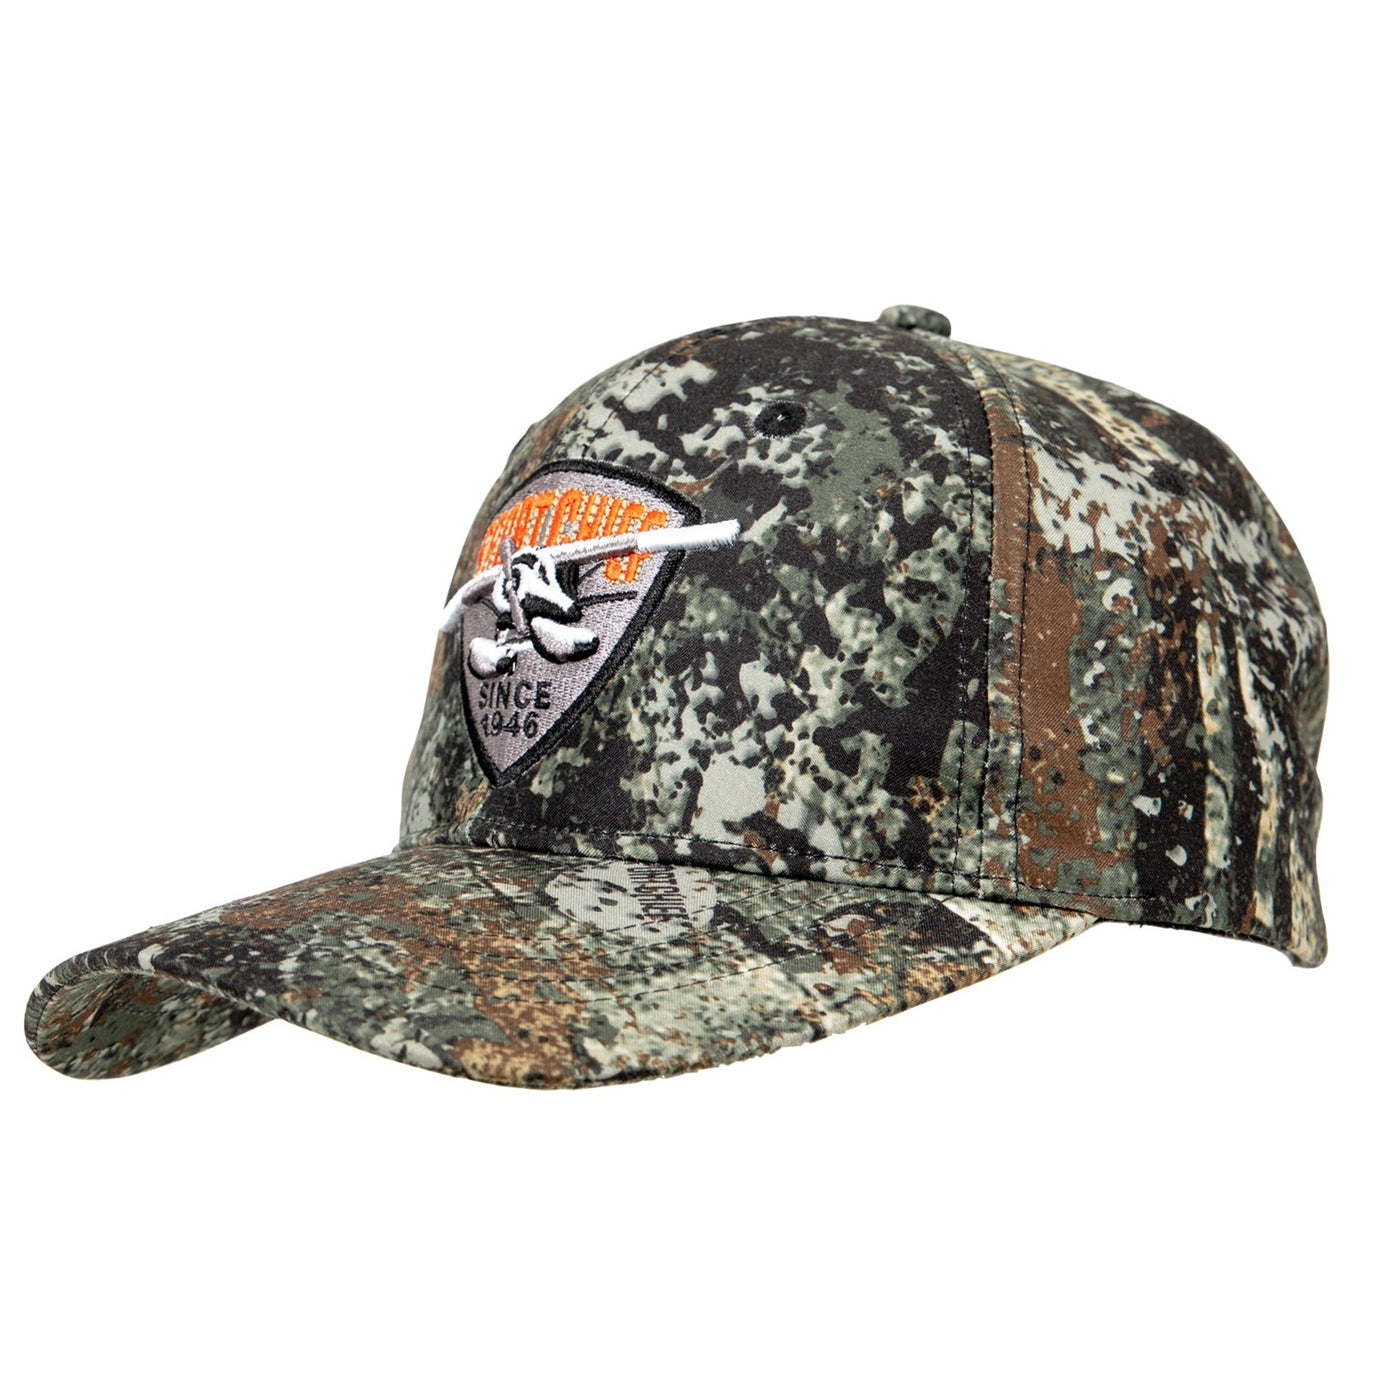 Men's hunting camo Cap The Ripper by Sportchief